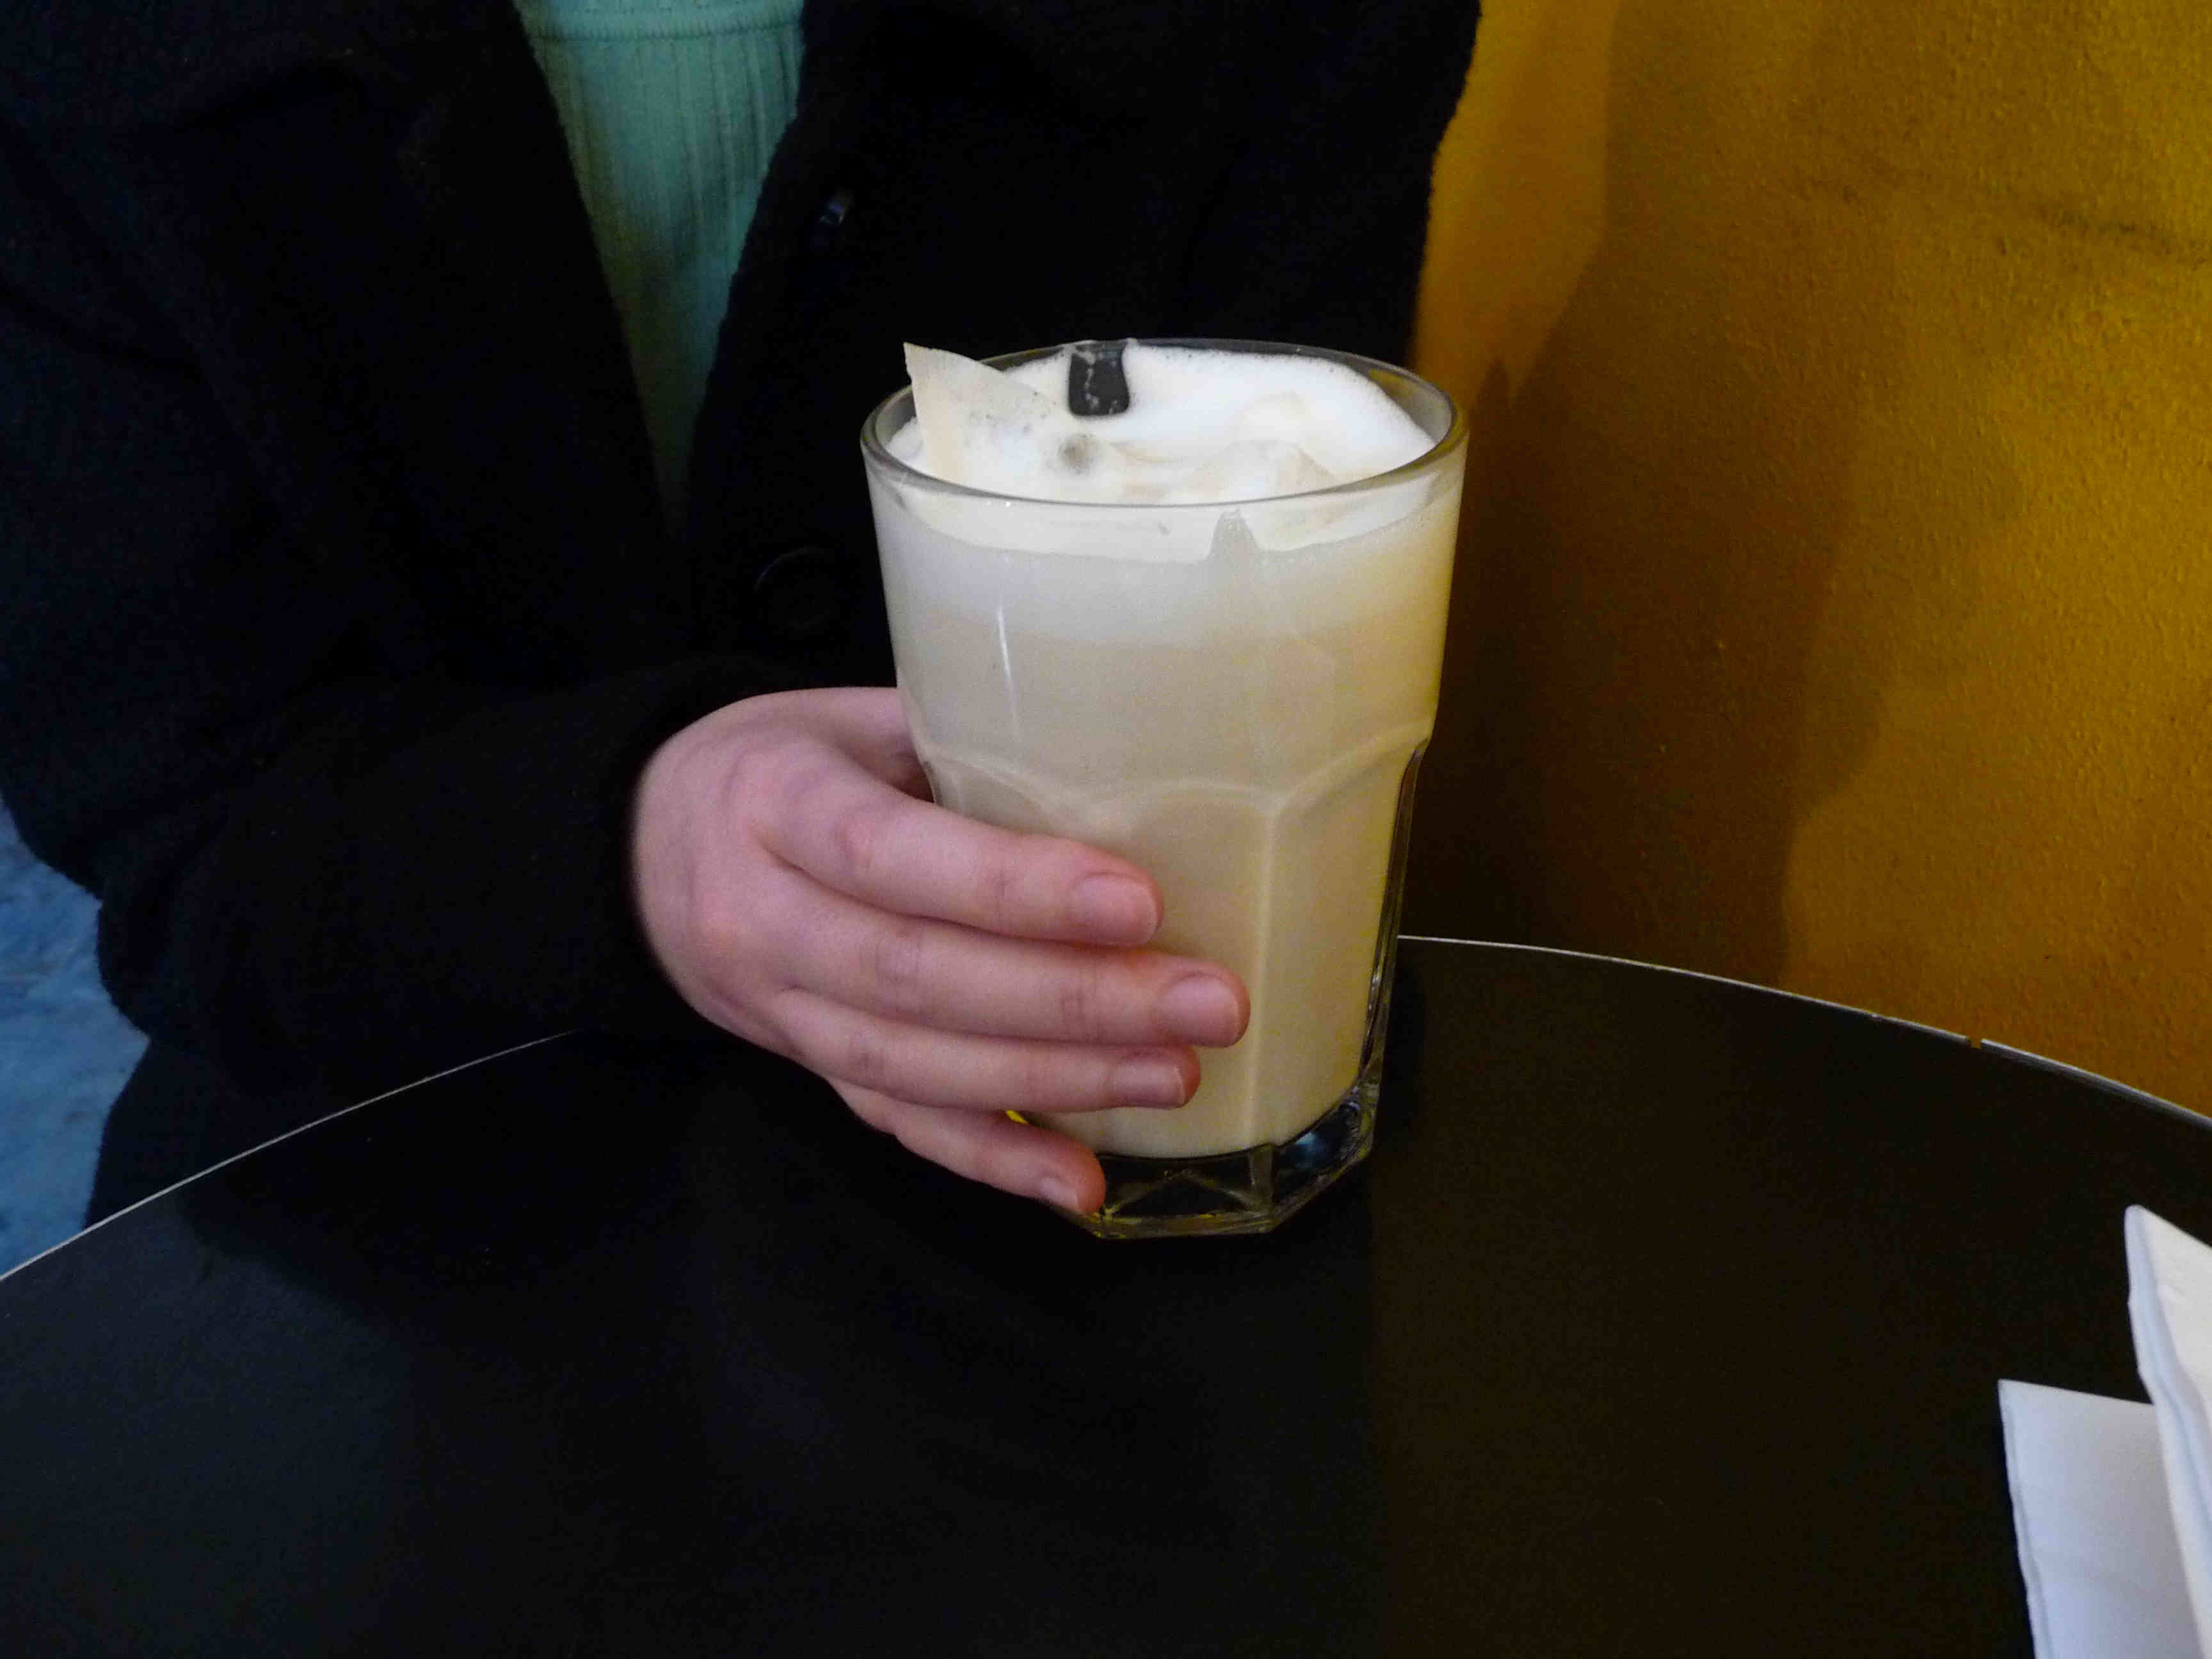 The Chai latte; notice the teabags steeping in the milk.